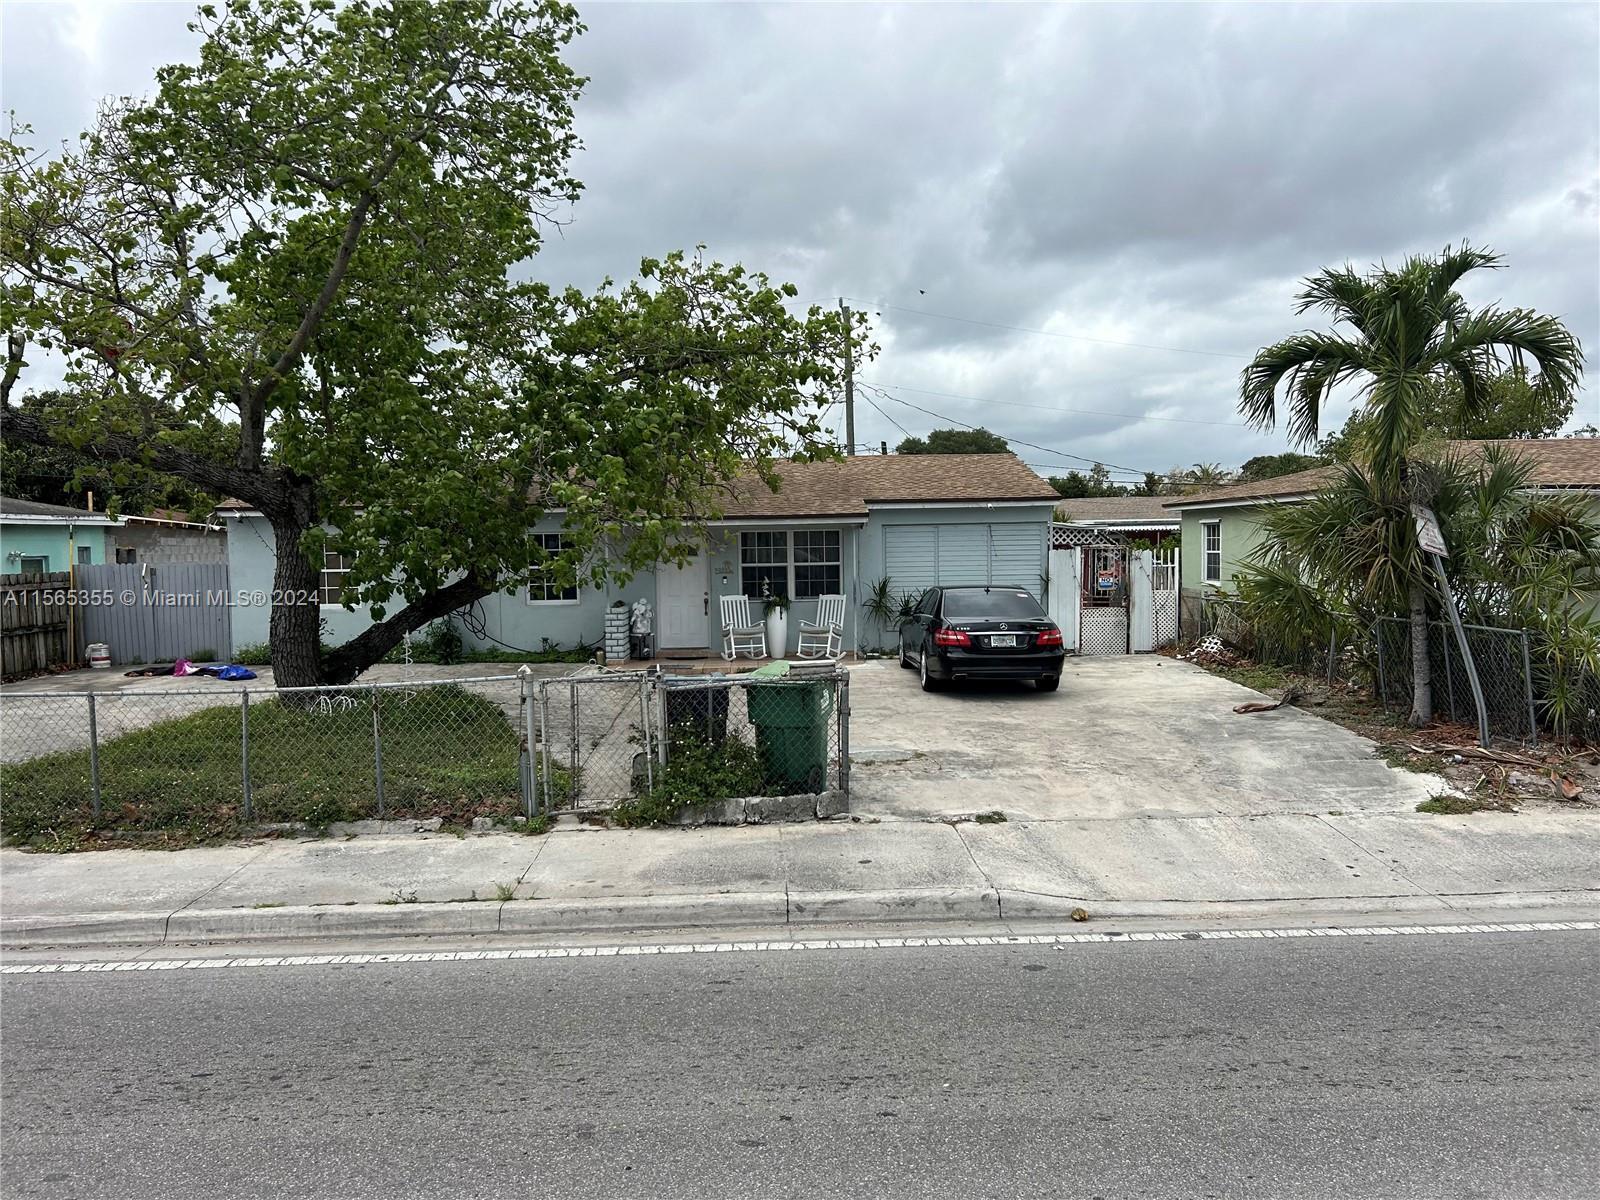 Photo of 9030 NW 32nd Ave in Miami, FL